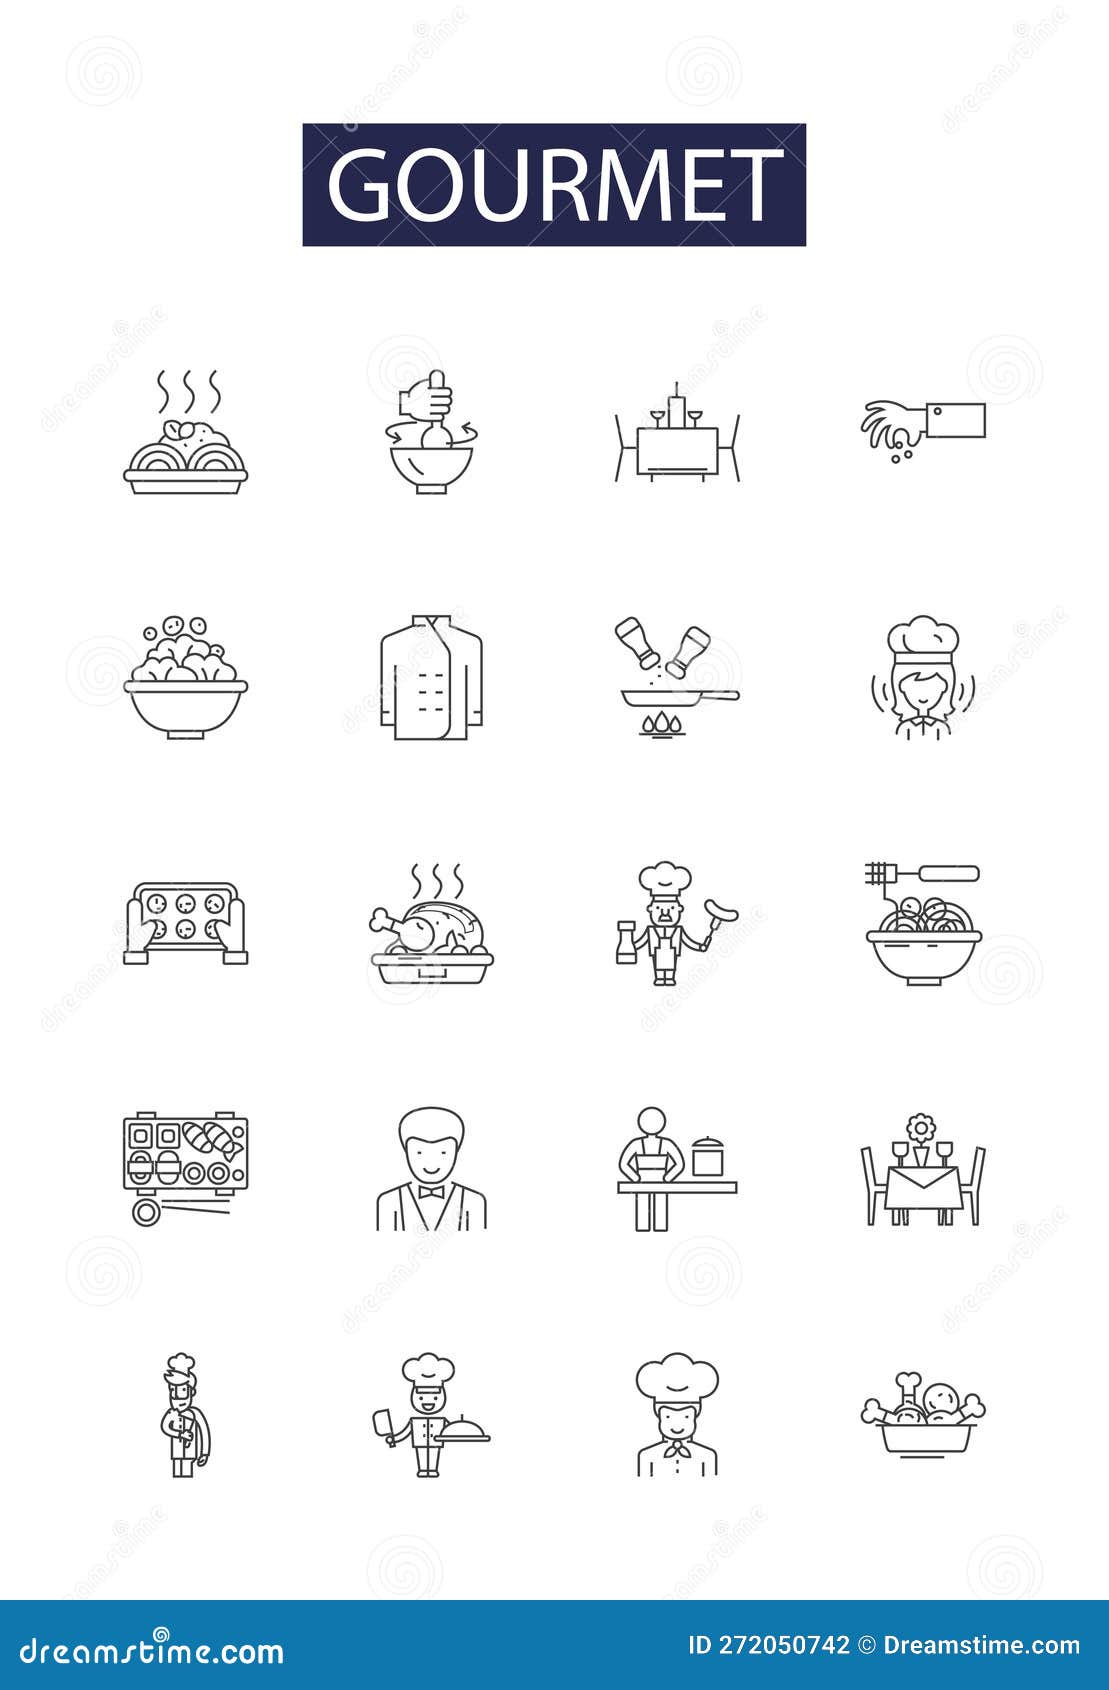 gourmet line  icons and signs. cuisine, epicurean, epicure, palatable, dainty, gourmand, tasty, flavorsome outline